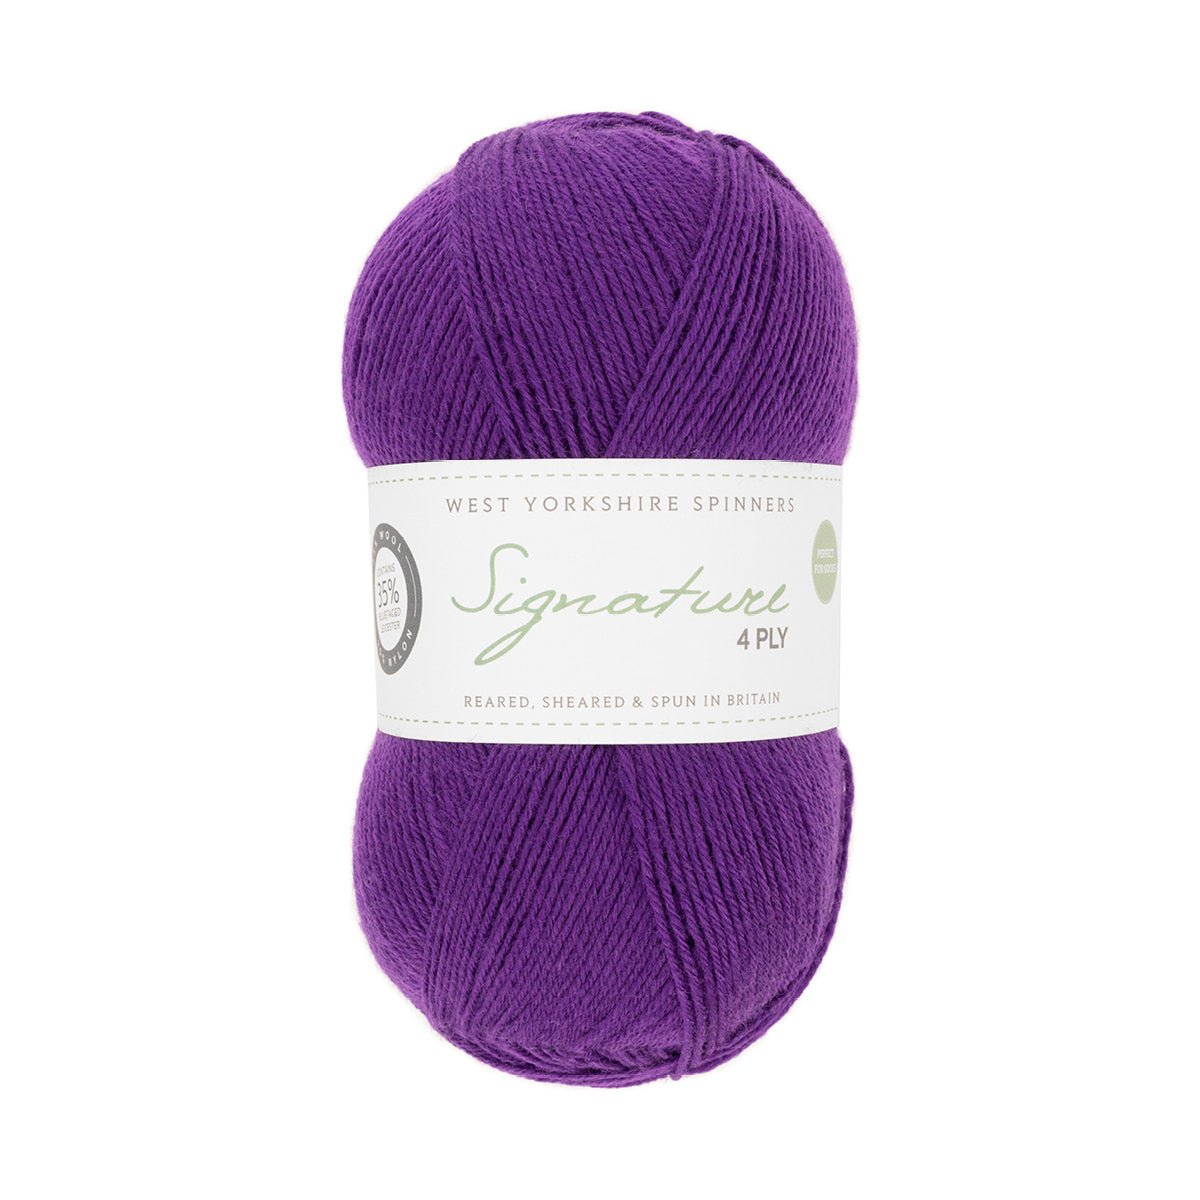 SIGNATURE 4PLY - HAPPY FEET COLLECTION 1003-Amethyst - West Yorkshire Spinners